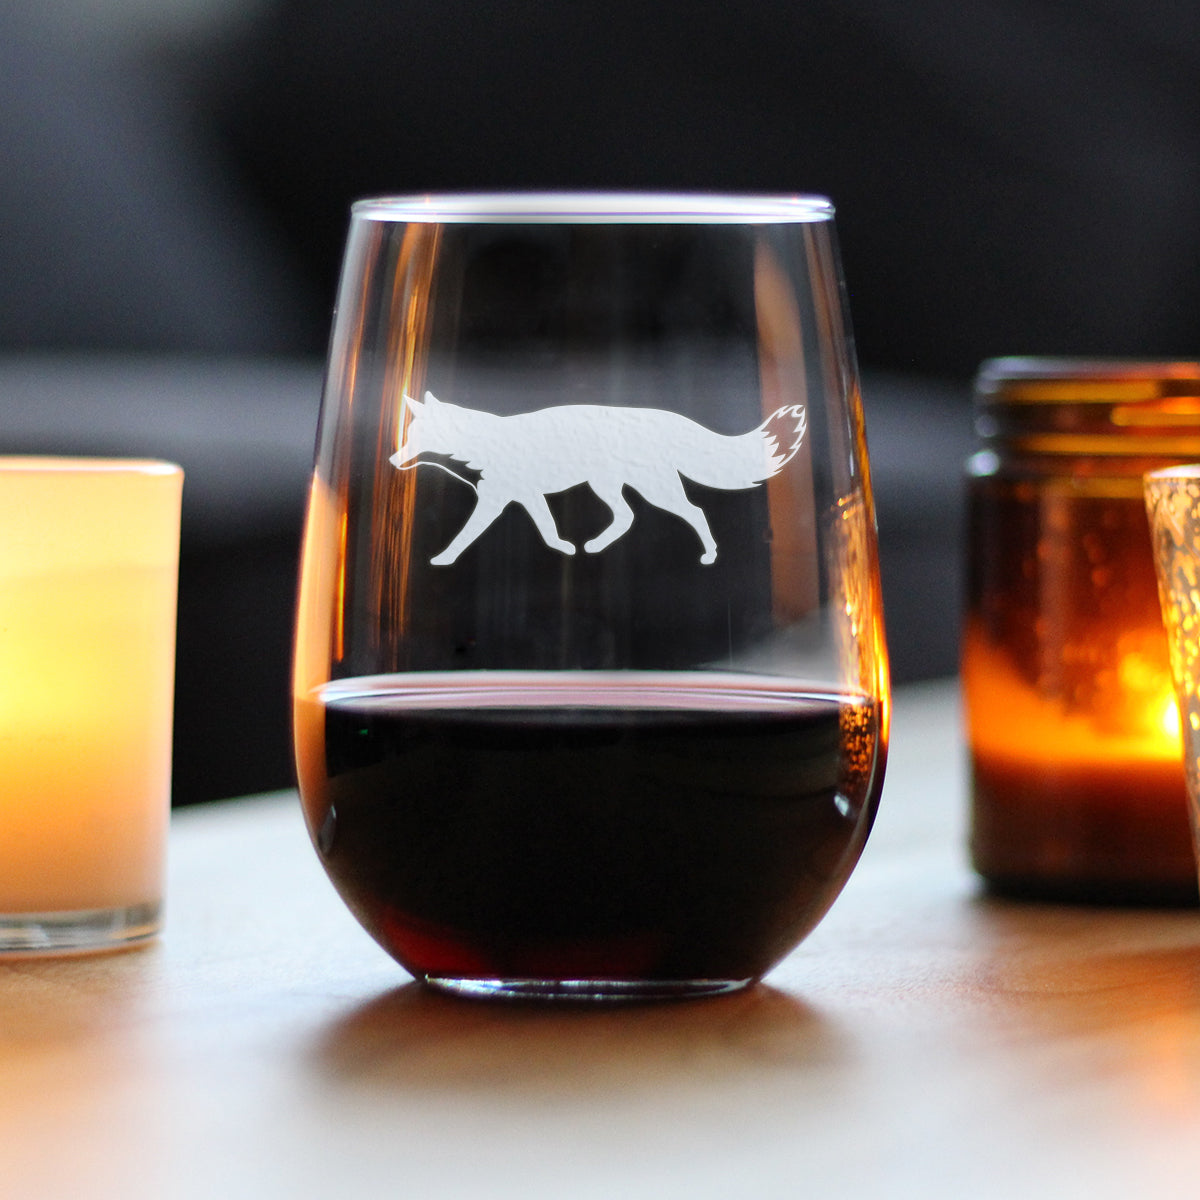 Fox Silhouette Stemless Wine Glass - Cabin Themed Fox Gifts or Rustic Fox Decor for Women and Men - Large 17 Oz Glasses